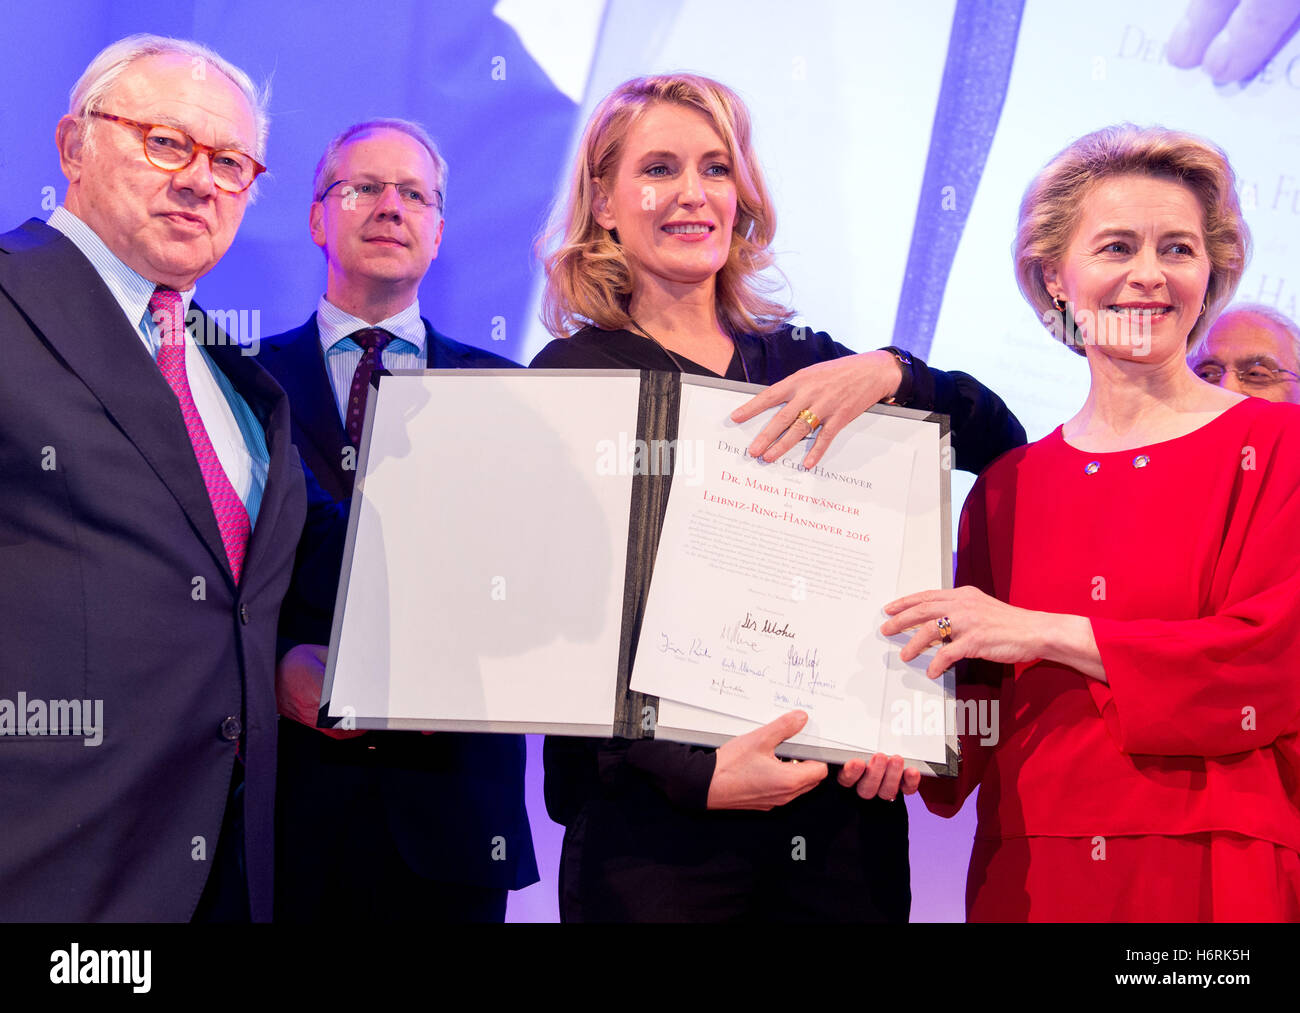 German actress Maria Furtwaengler (C) with her husband, publisher Hubert Burda (L), Mayor of Hanover Stefan Schostock (2-L) and Minster for Defence Ursula von der Leyen (R) after receiving the Leibinz Ring, an award for special achievements awarded by the Press Club Hanover since 1997, in Hanover, Germany, 31 October 2016. Furtwaengler received the award for her work for the prevention of violence against children. The original ring, made especially for Furtwaengler, was stolen. Furtwaengler was presented with a hastily made replica of the original. Photo: Hauke-Christian Dittrich/dpa Stock Photo